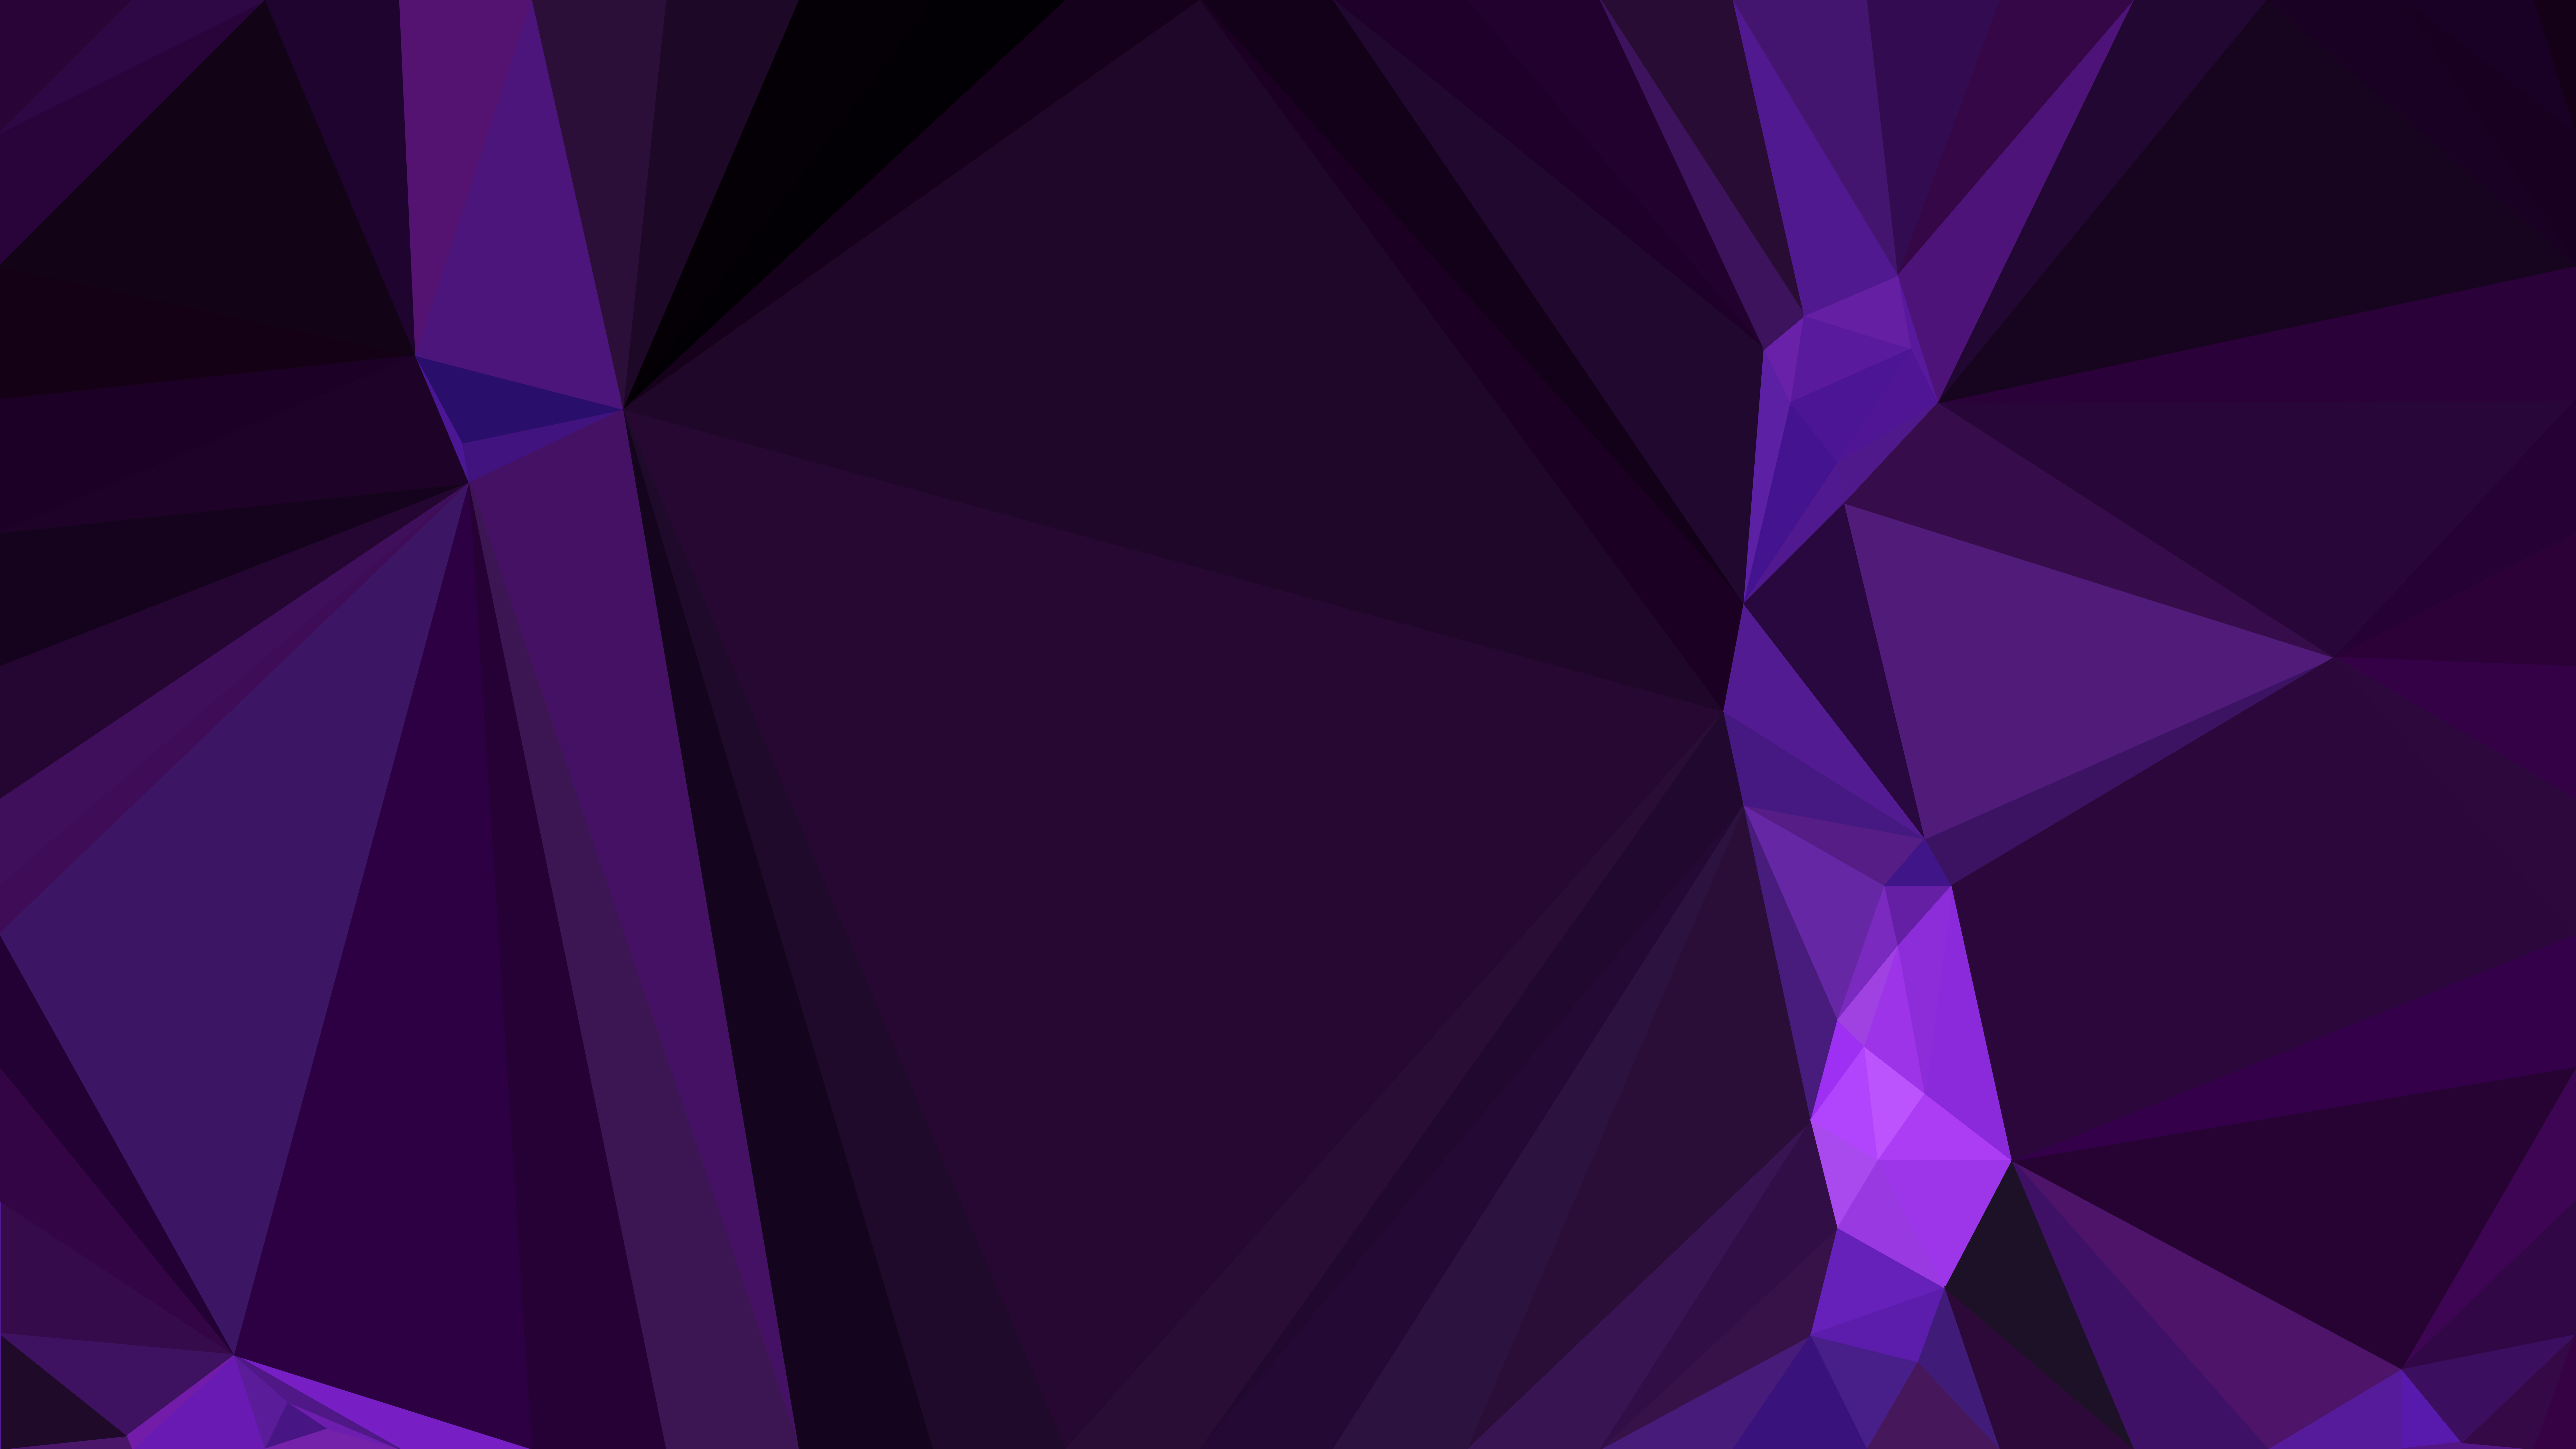 Free Abstract Cool Purple Geometric Shapes Background